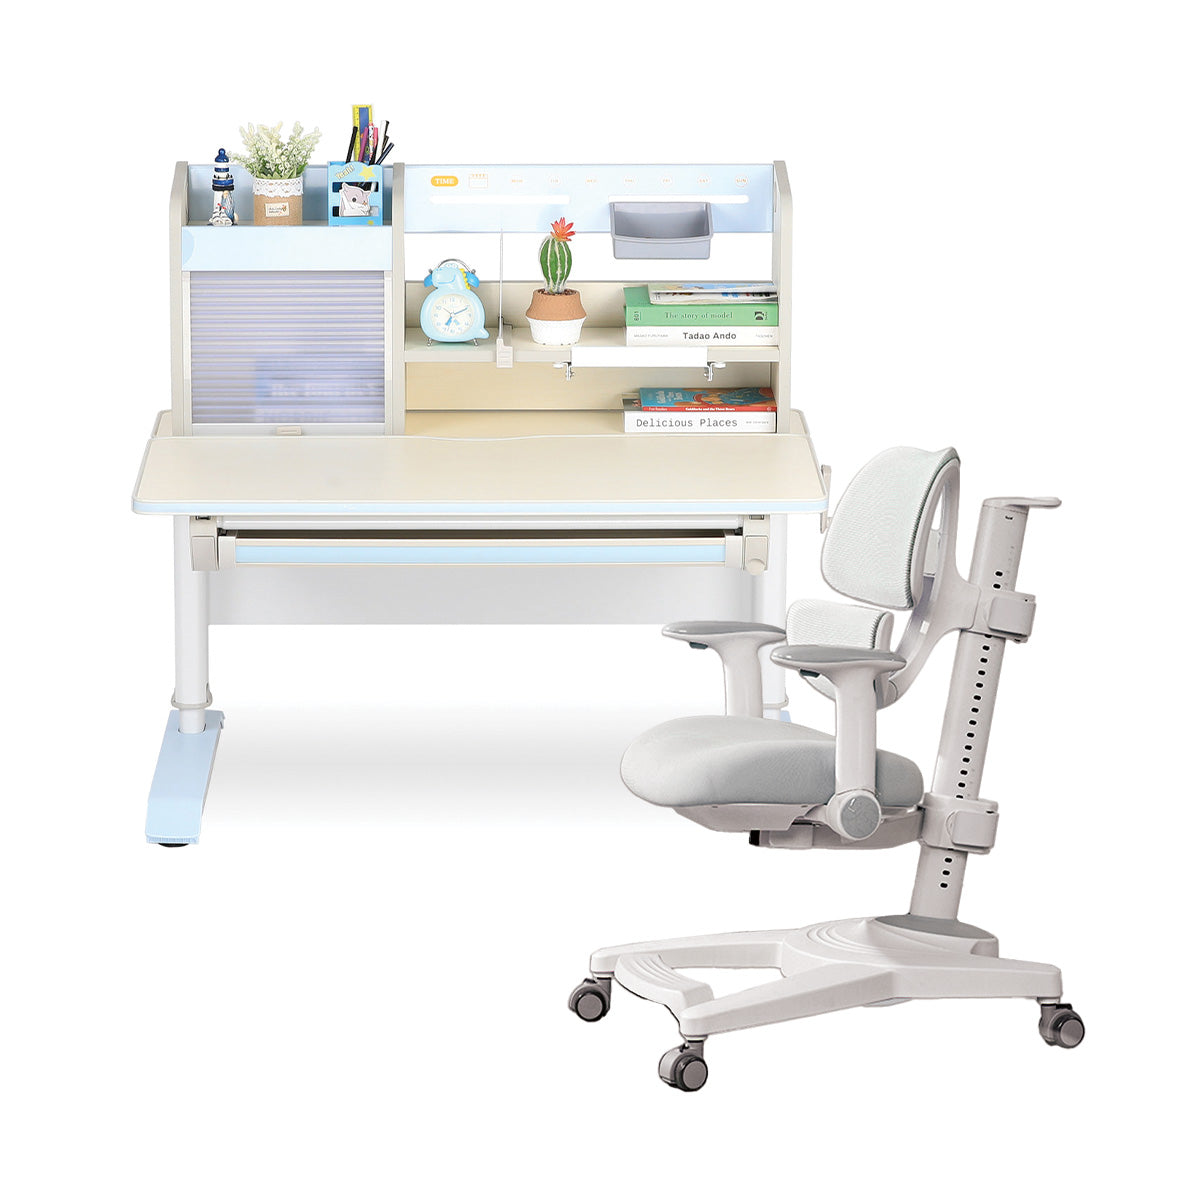 IMPACT Ergo-Growing Study Desk And Chair Set 1050mm x 700mm,  IM-D12M1050V2-BL